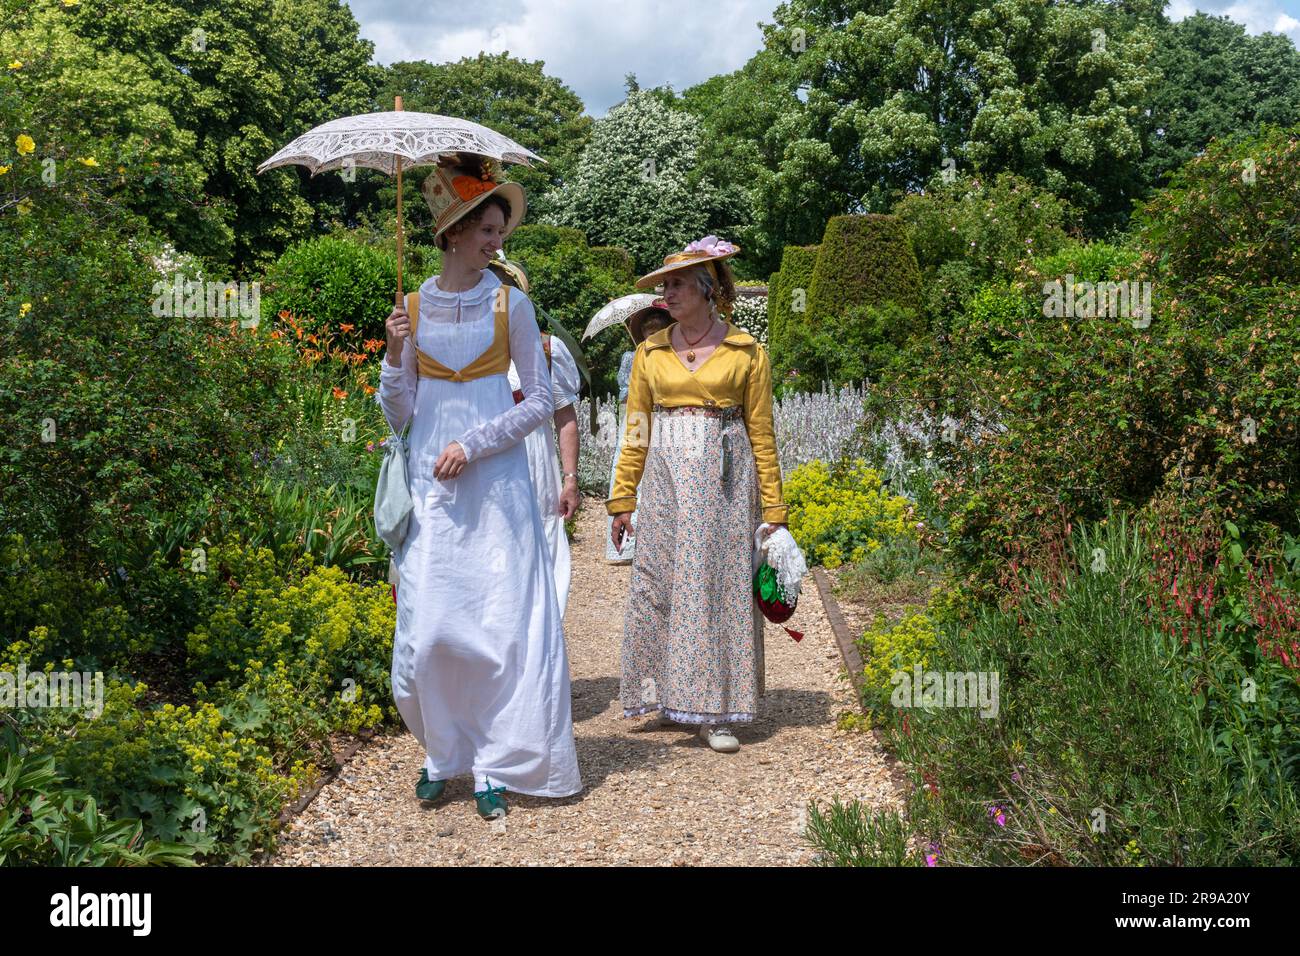 Ladies dressed in vintage Victorian dresses or costumes walking through an English garden in summer carrying parasols, England, UK Stock Photo